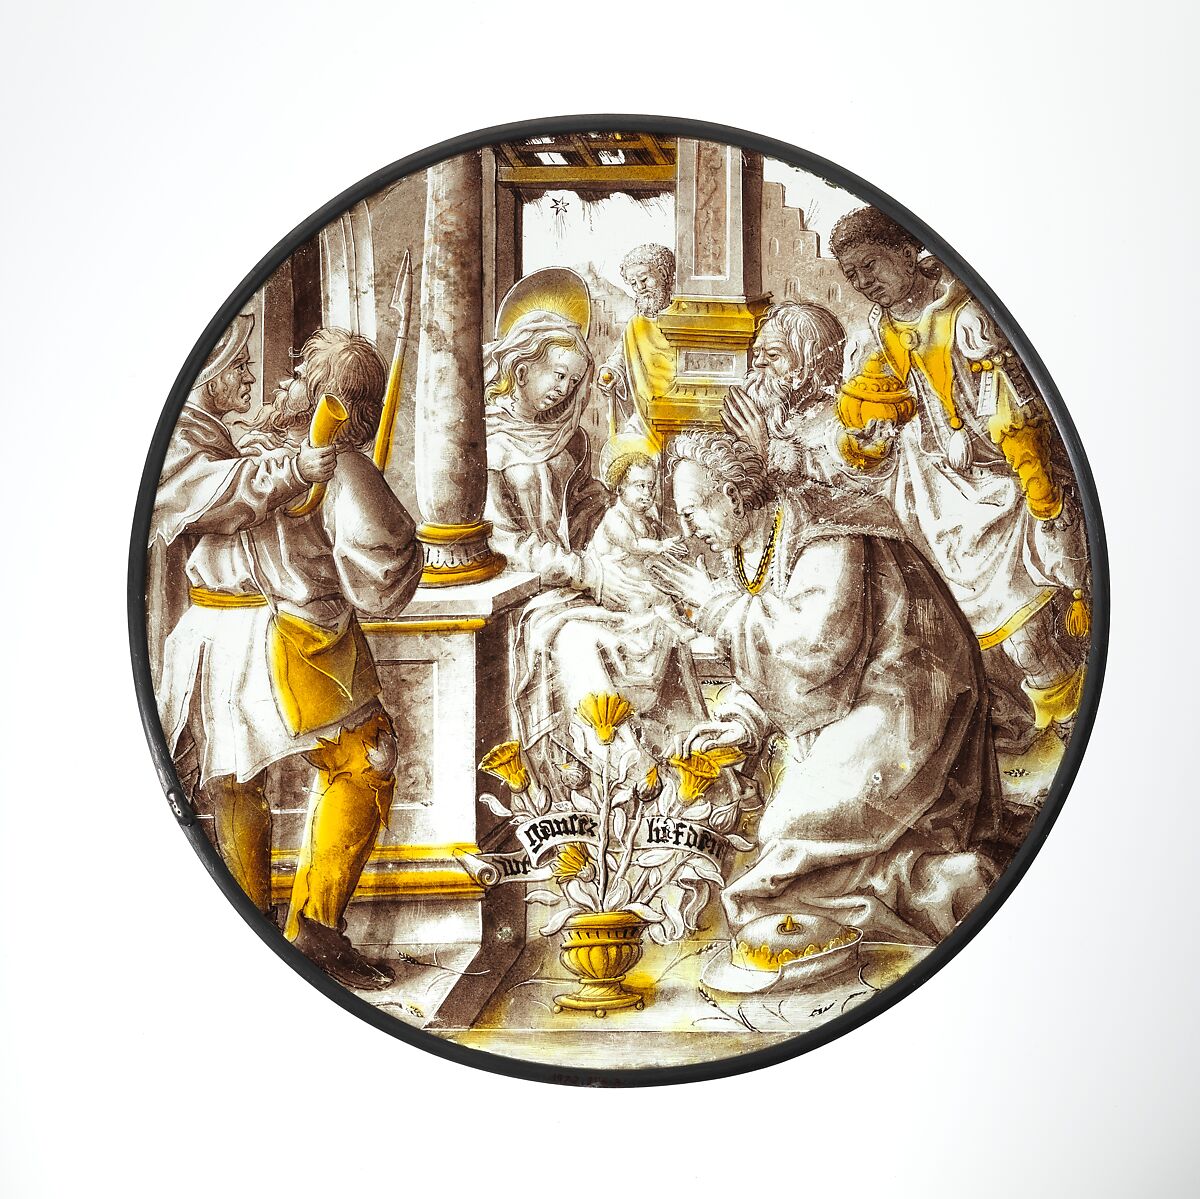 Roundel with Adoration of the Kings, Colorless glass, vitreous paint and silver stain, North Netherlandish 